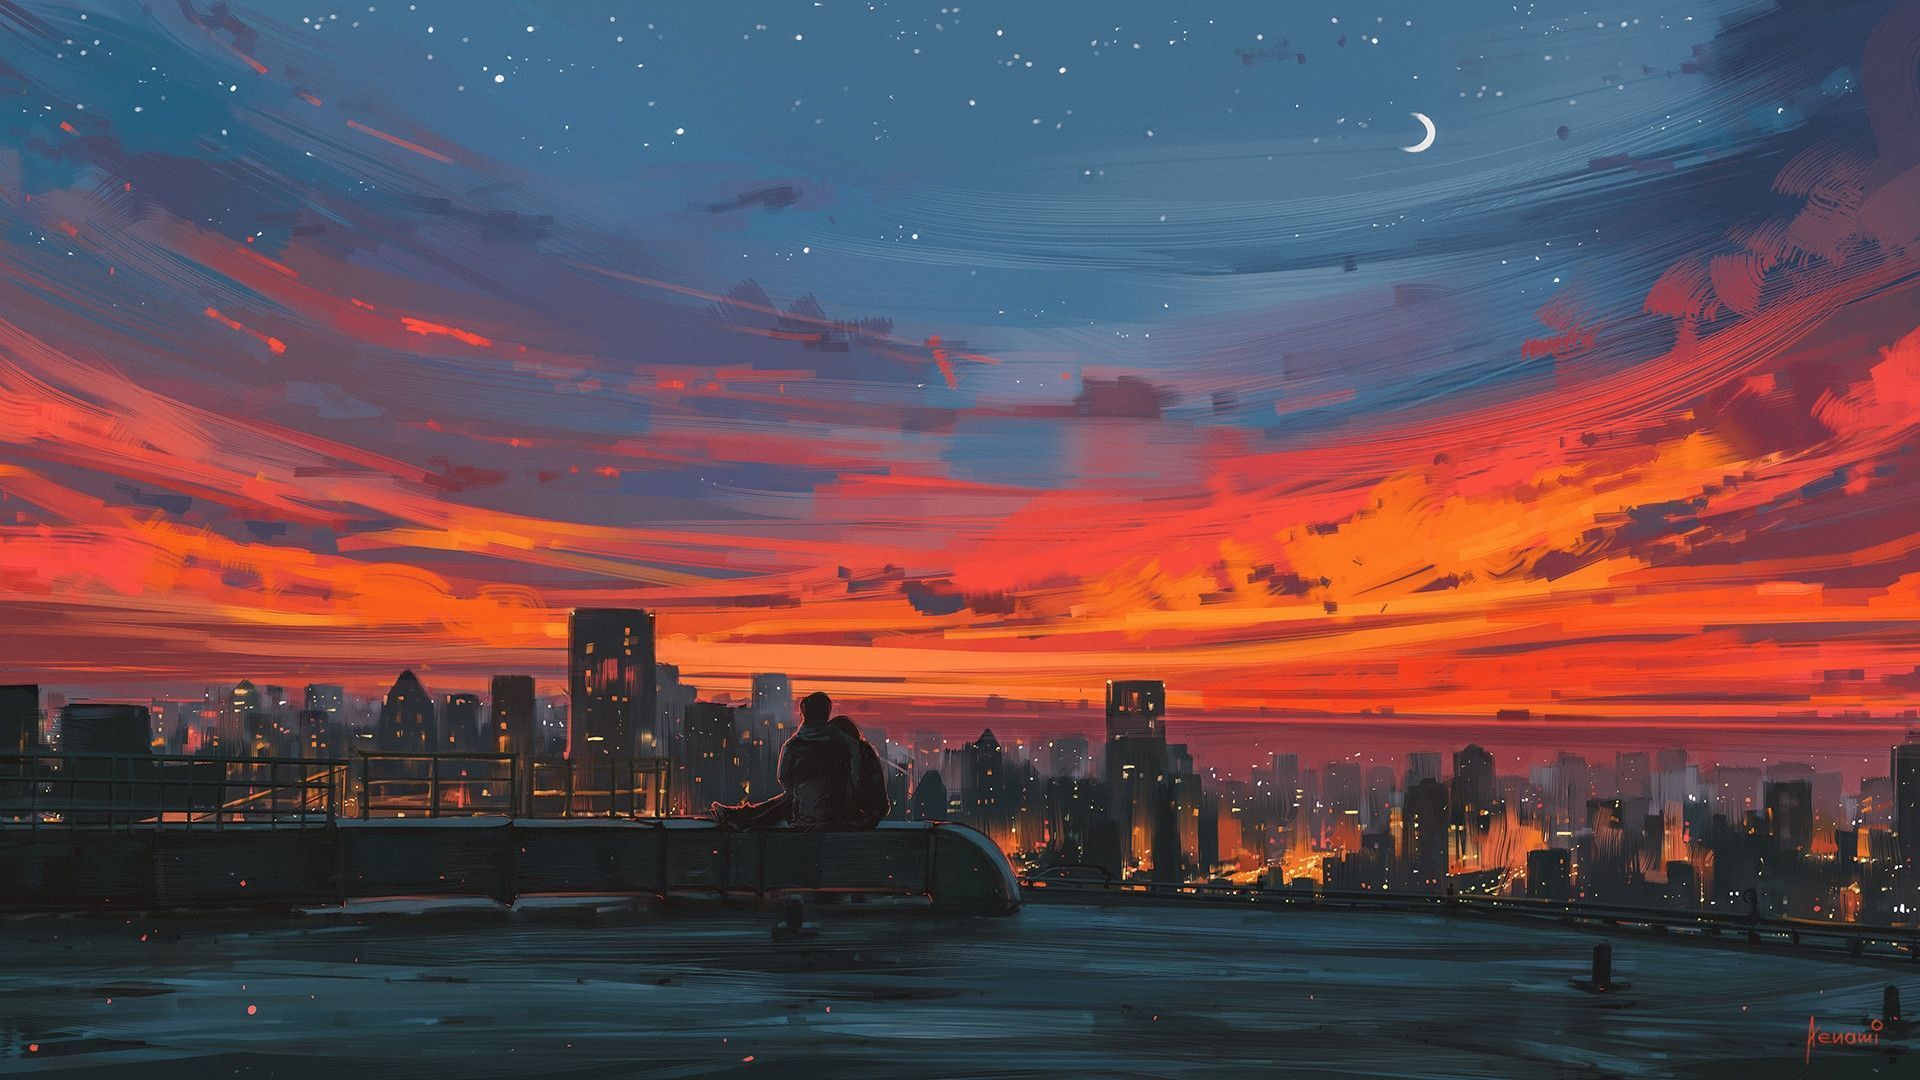 A painting of the city at sunset - Desktop, cool, Windows 10, cityscape, skyline, sunset, computer, anime sunset